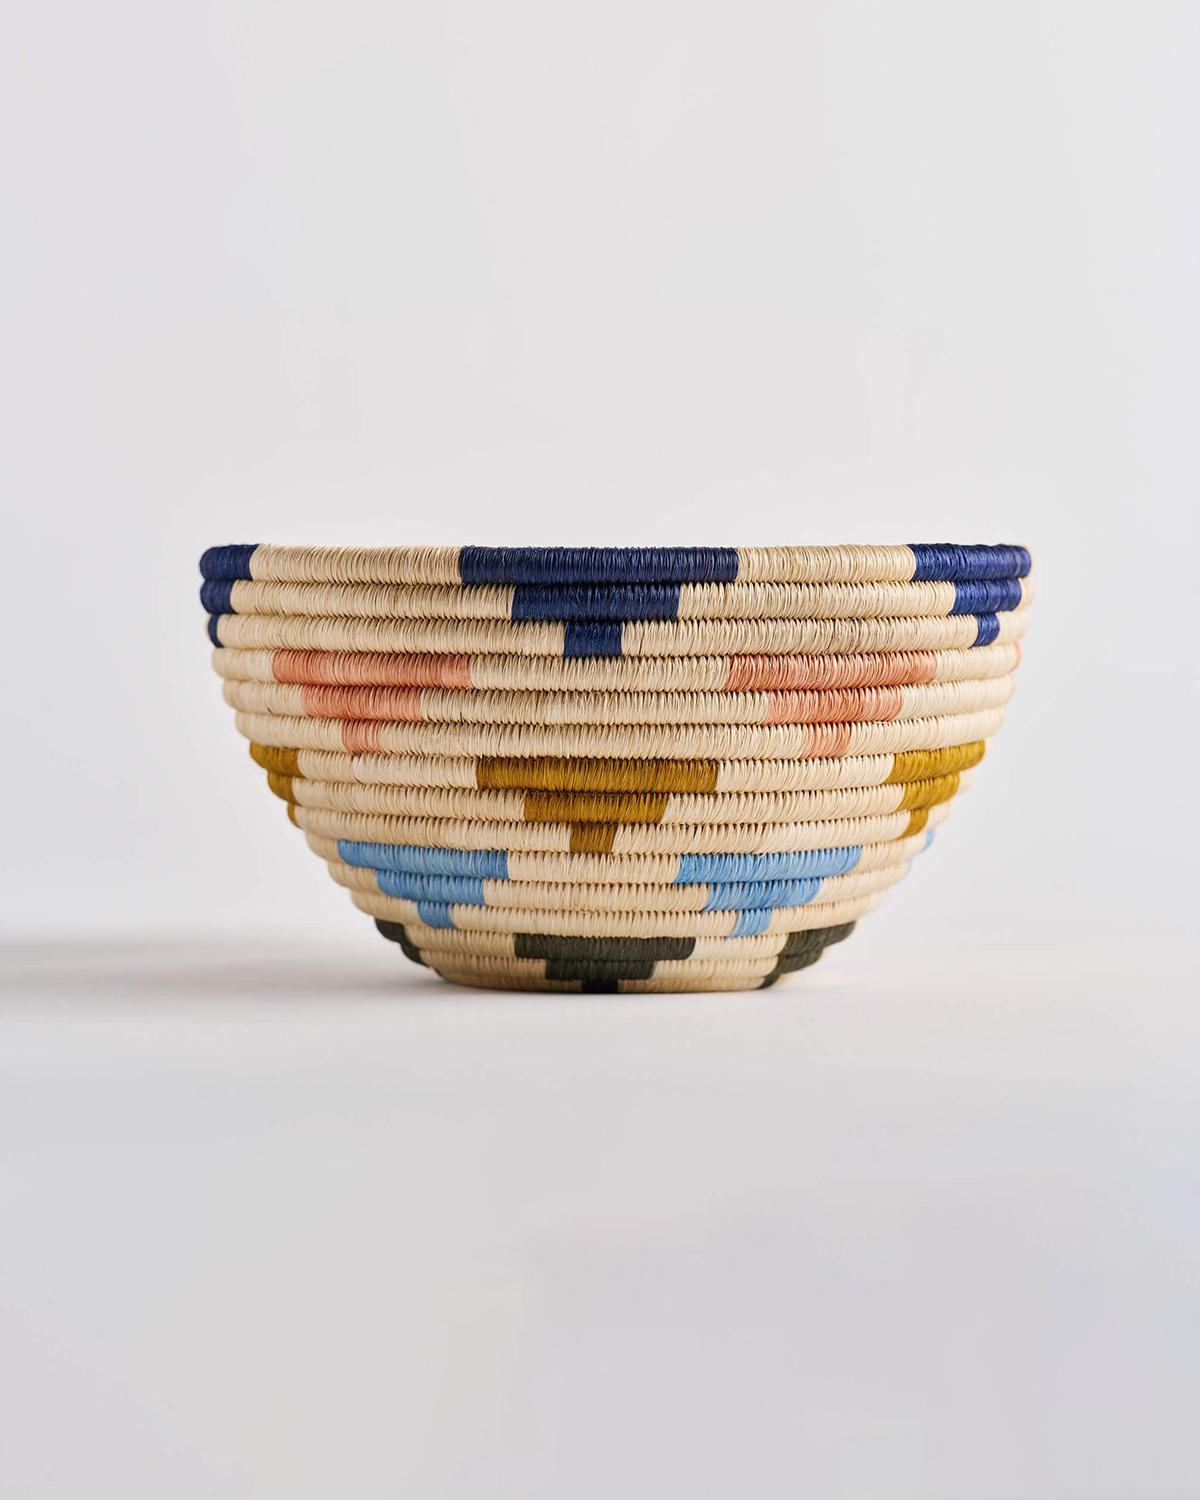 A colorful handwoven basket to decorate your kitchen table
This design showcases lively Caribbean colors of blues, greens, and pinks, bringing energy and brightness into our homes no matter the weather. Make it extra fun by pairing this multi-color